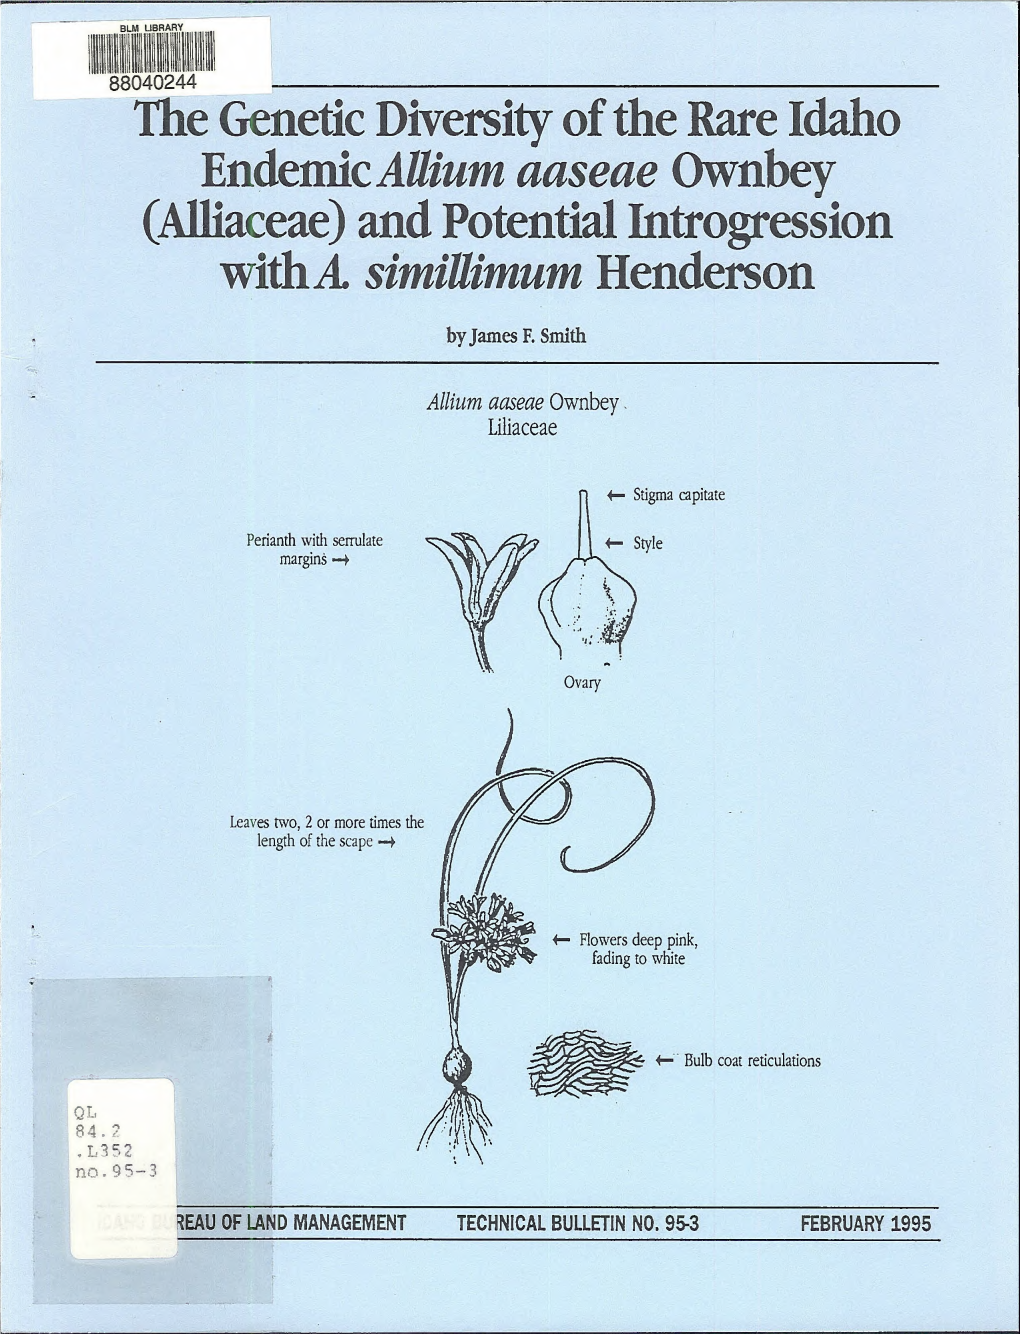 The Genetic Diversity of the Rare Idaho Endemic Allium Aaseae Ownbey (Alliaceae) and Potential Introgression Witha Simillimum Henderson